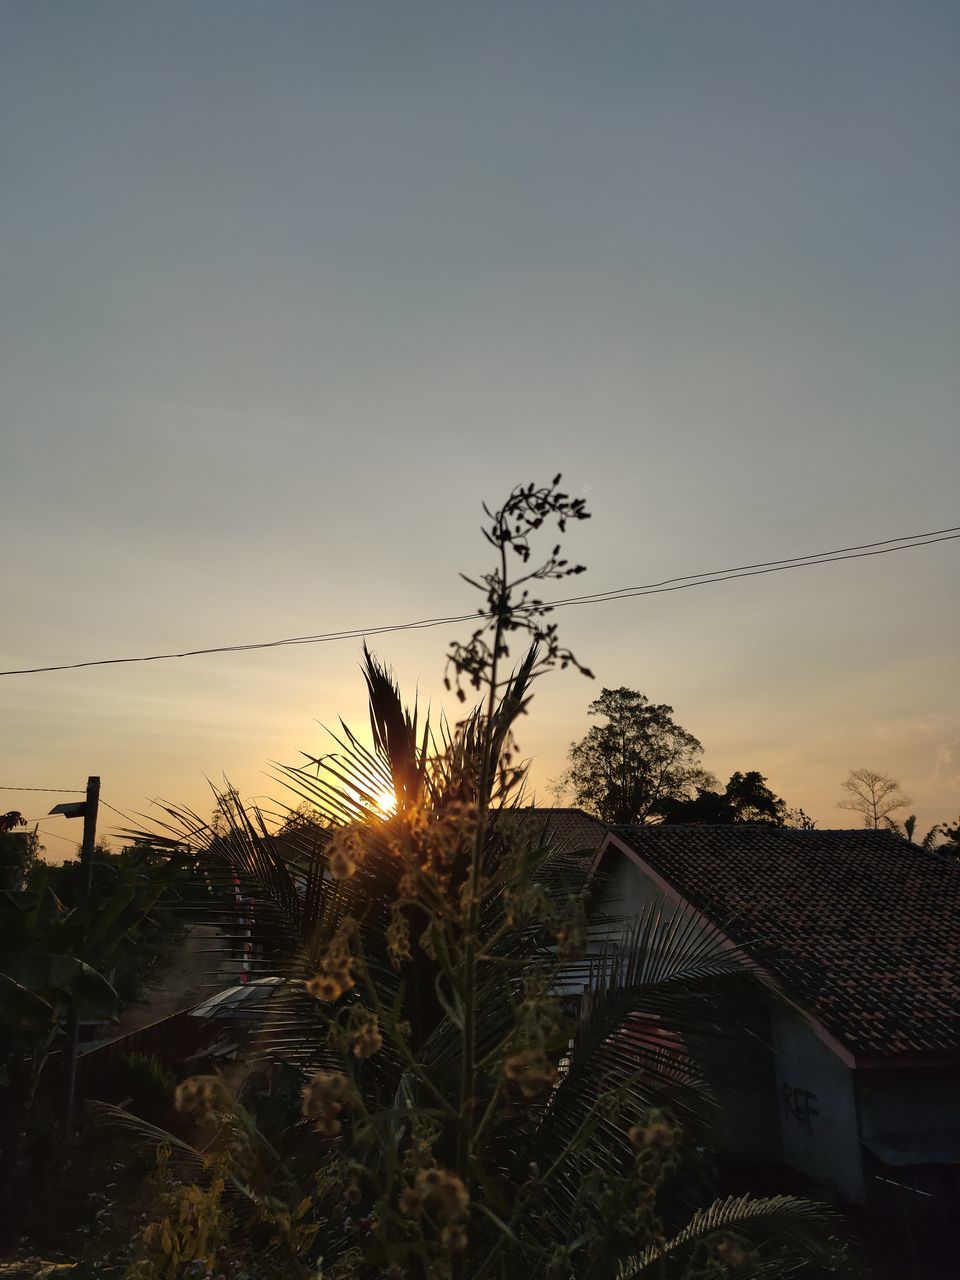 PLANTS GROWING OUTSIDE HOUSE AGAINST SKY AT SUNSET